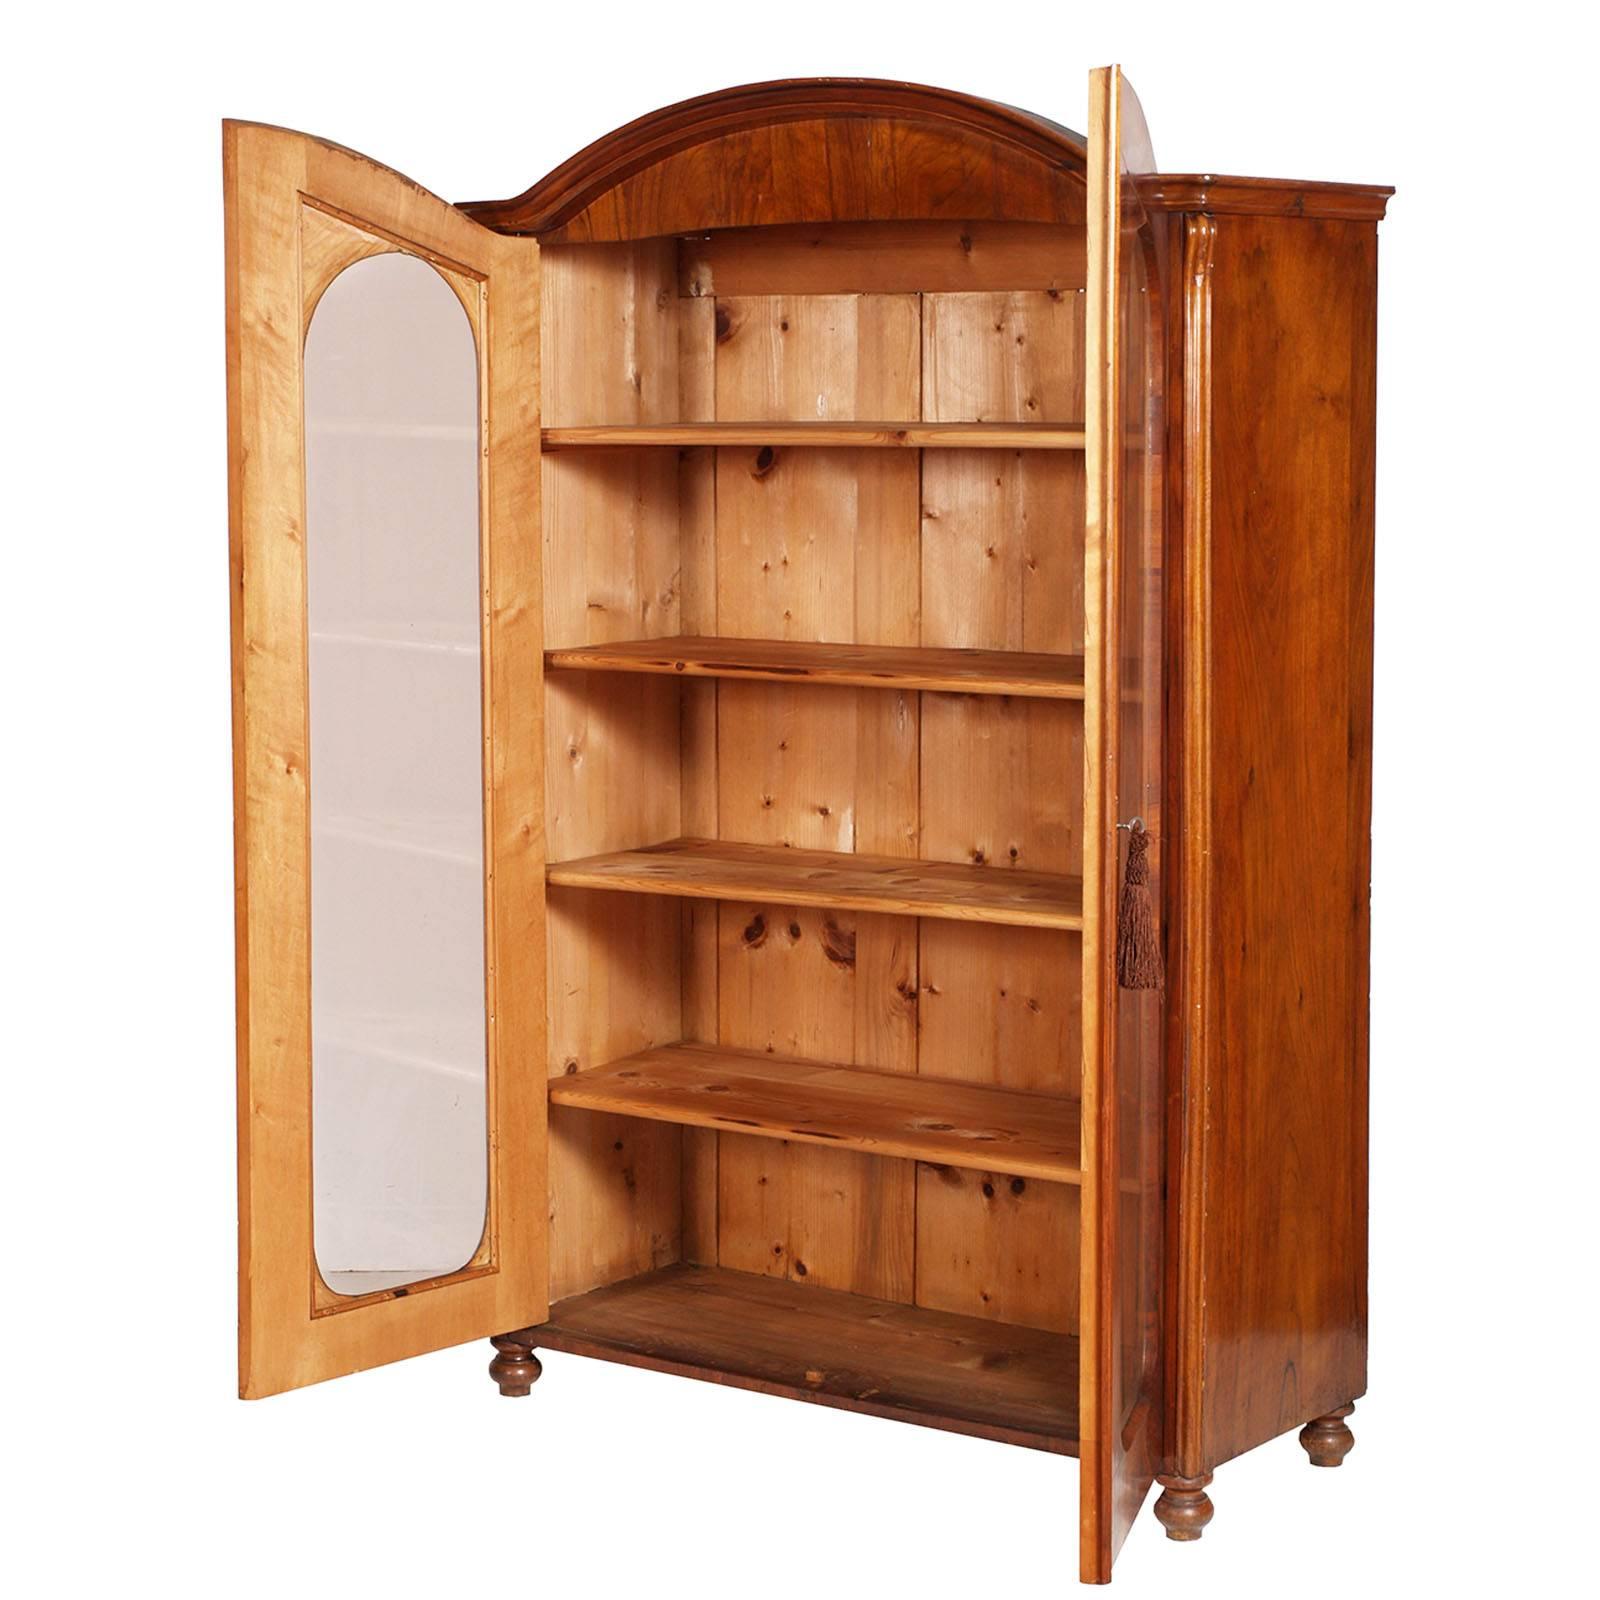 19th century Biedermeier bookcase  from Vienna in walnut applied as herringbone. Restored and finished to shellac and wax. 
The price includes the assembly of the transparent or printed glass chosen by the purchaser

Measures cm: H 187, W 124, D